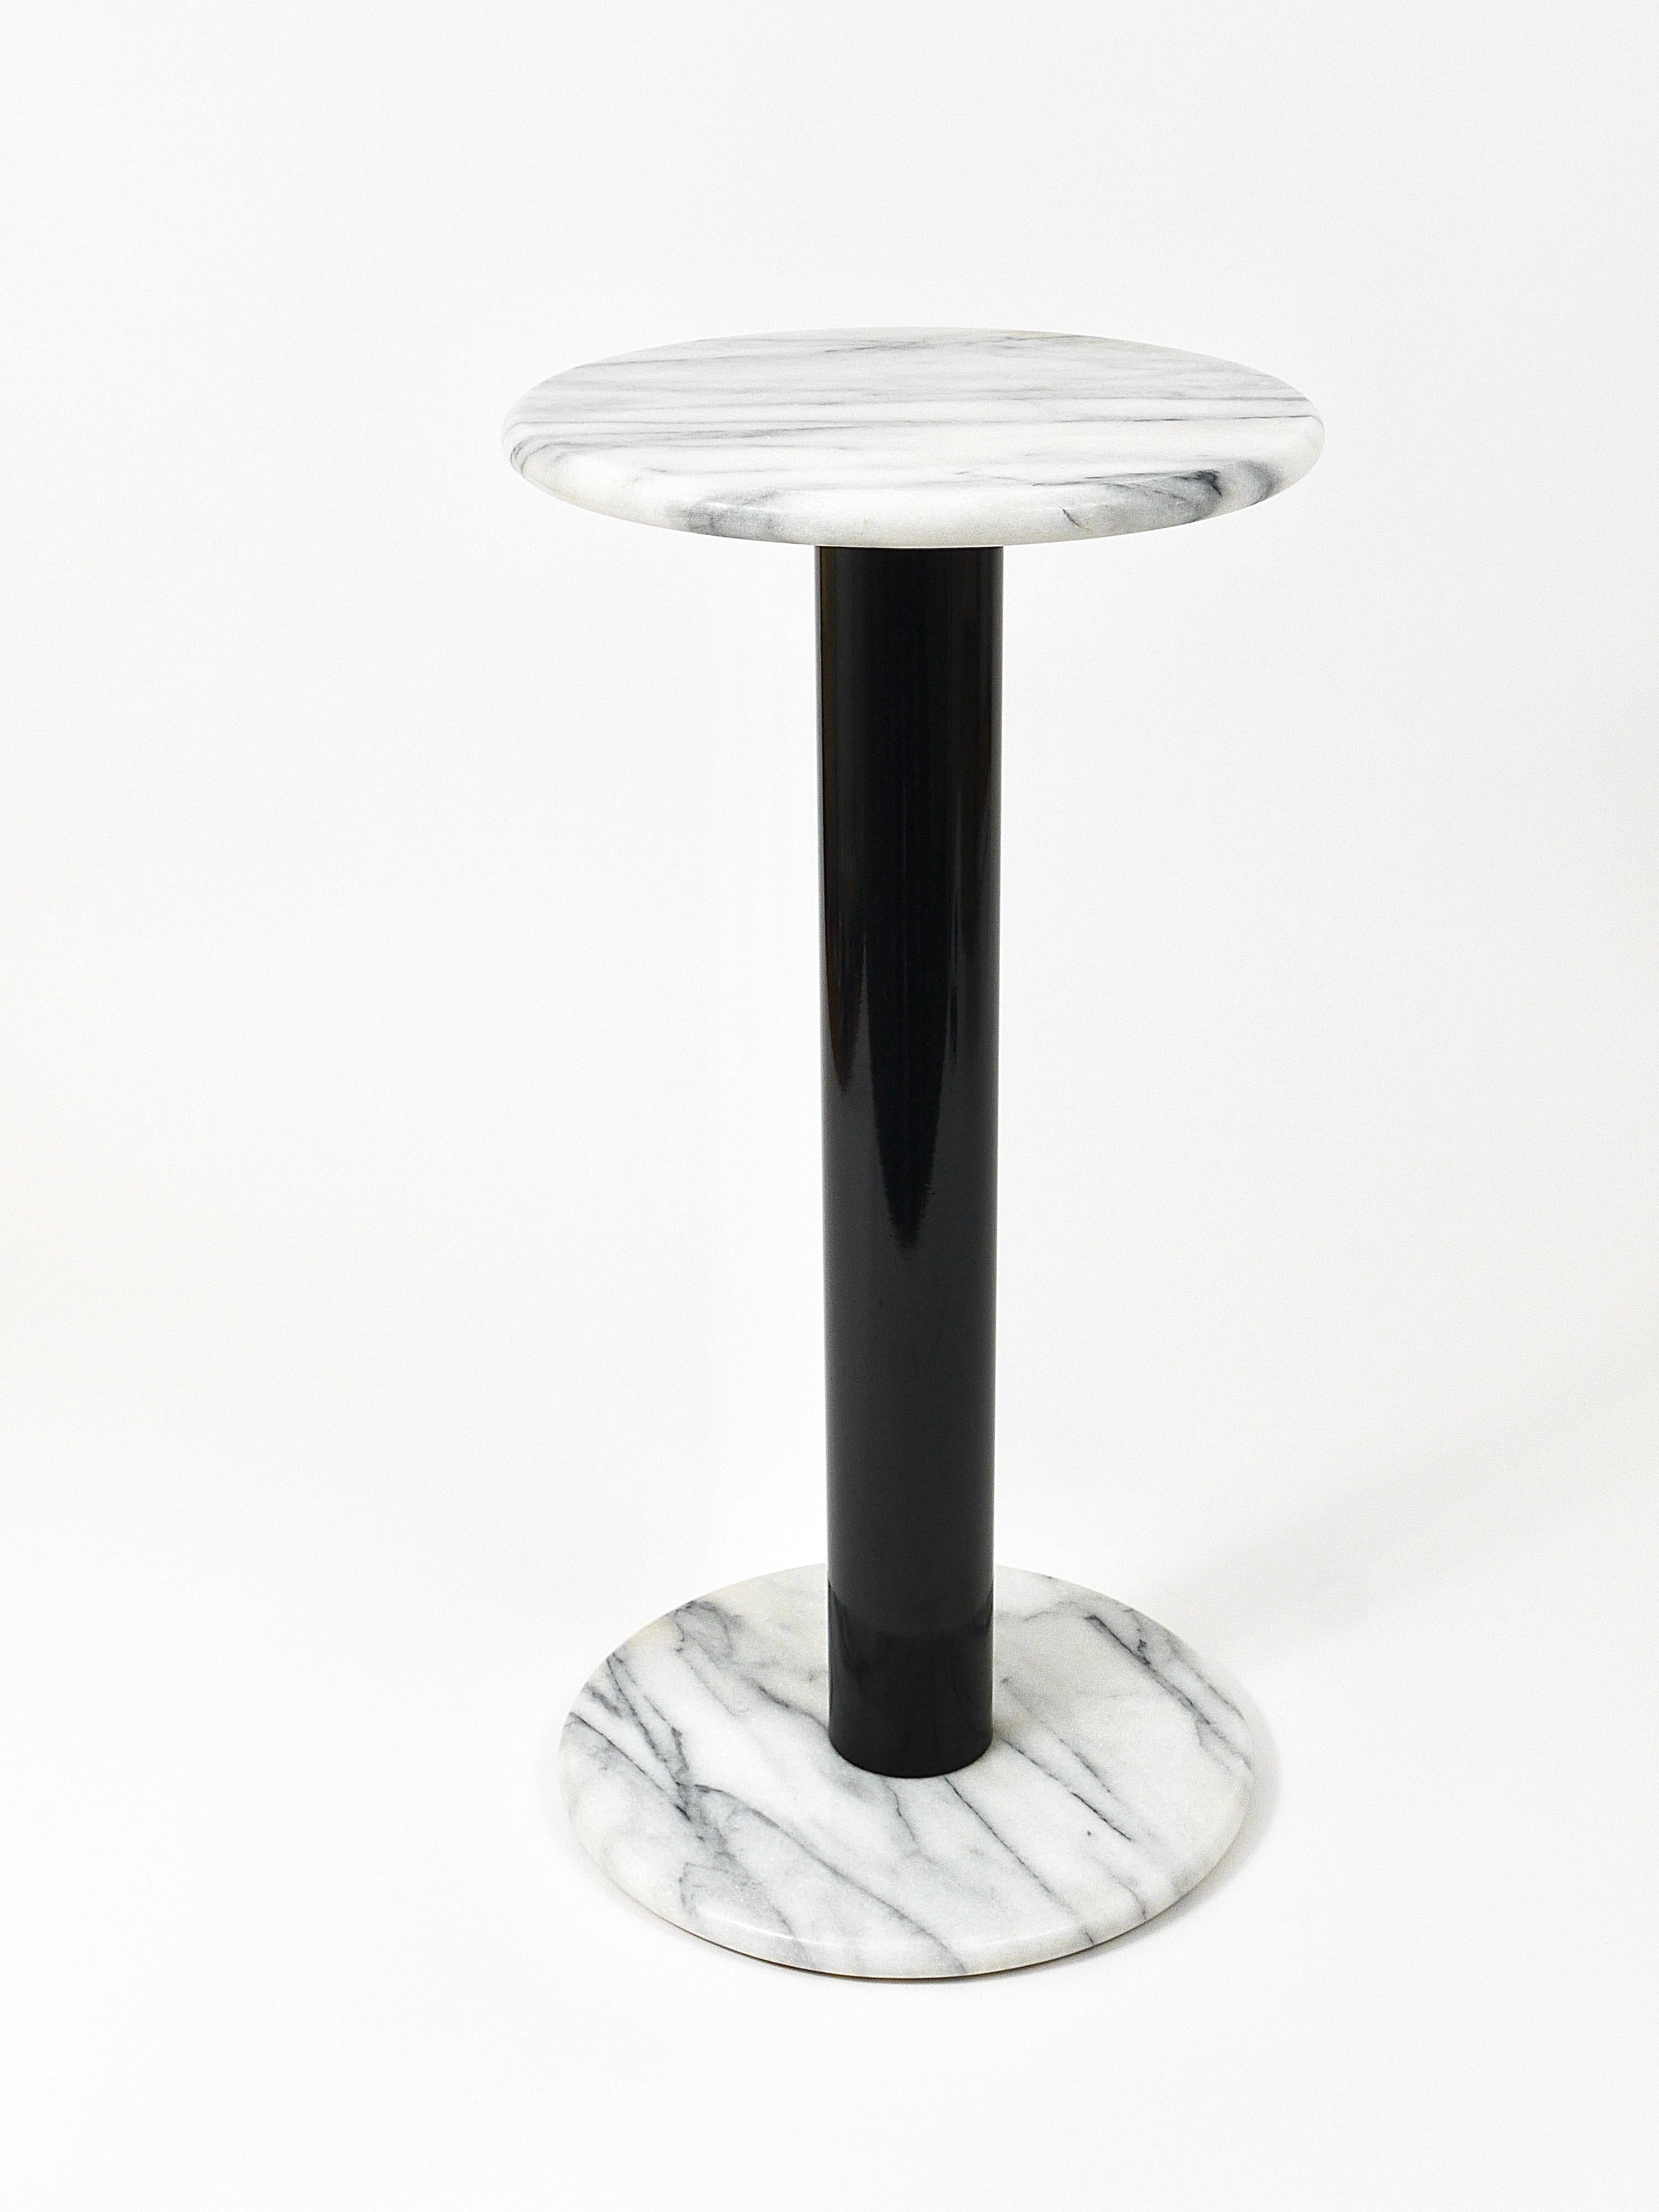 Postmodern White Carrara Marble Flower Stand Pedestal Table, Italy, 1980s For Sale 12